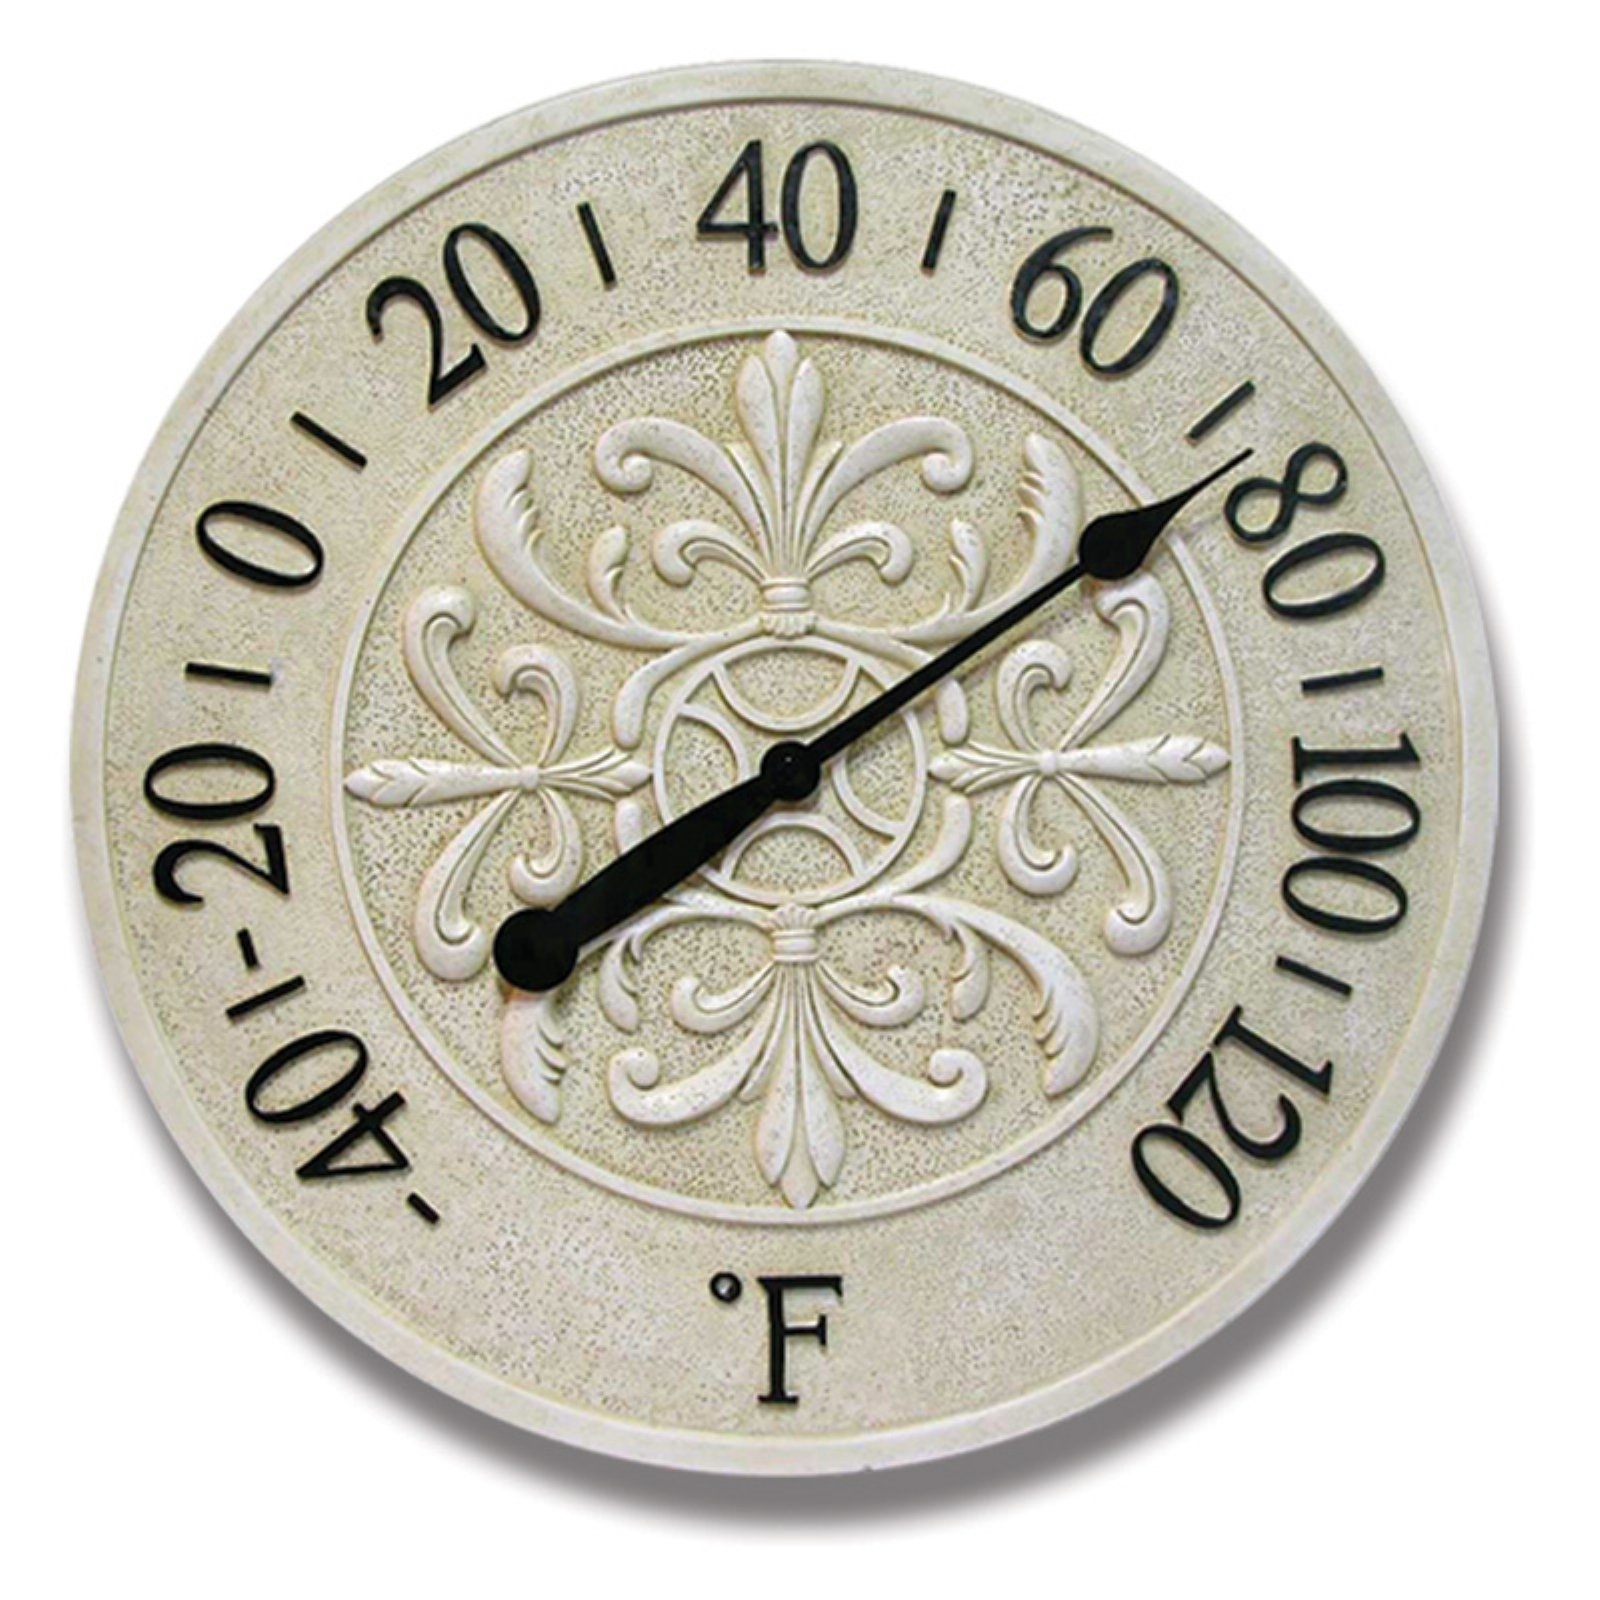 Outdoor Thermometer Decorative 